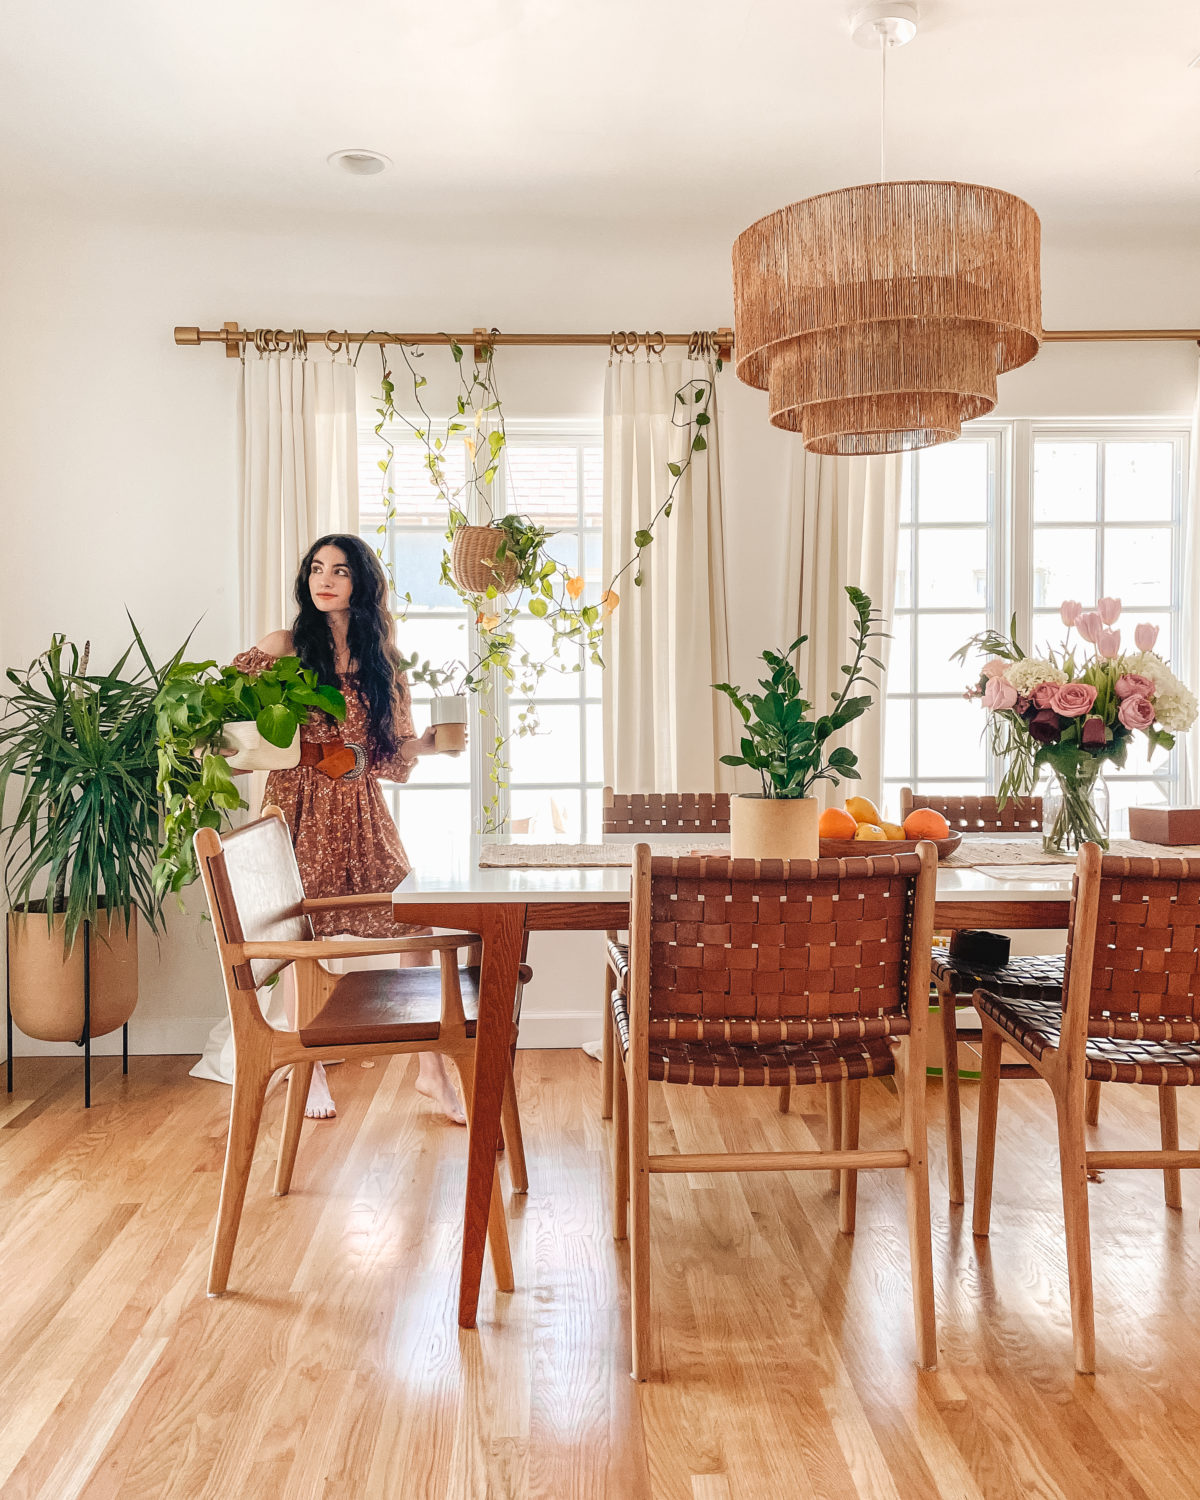 Our Earthy and Natural Dining Room: Get the Look